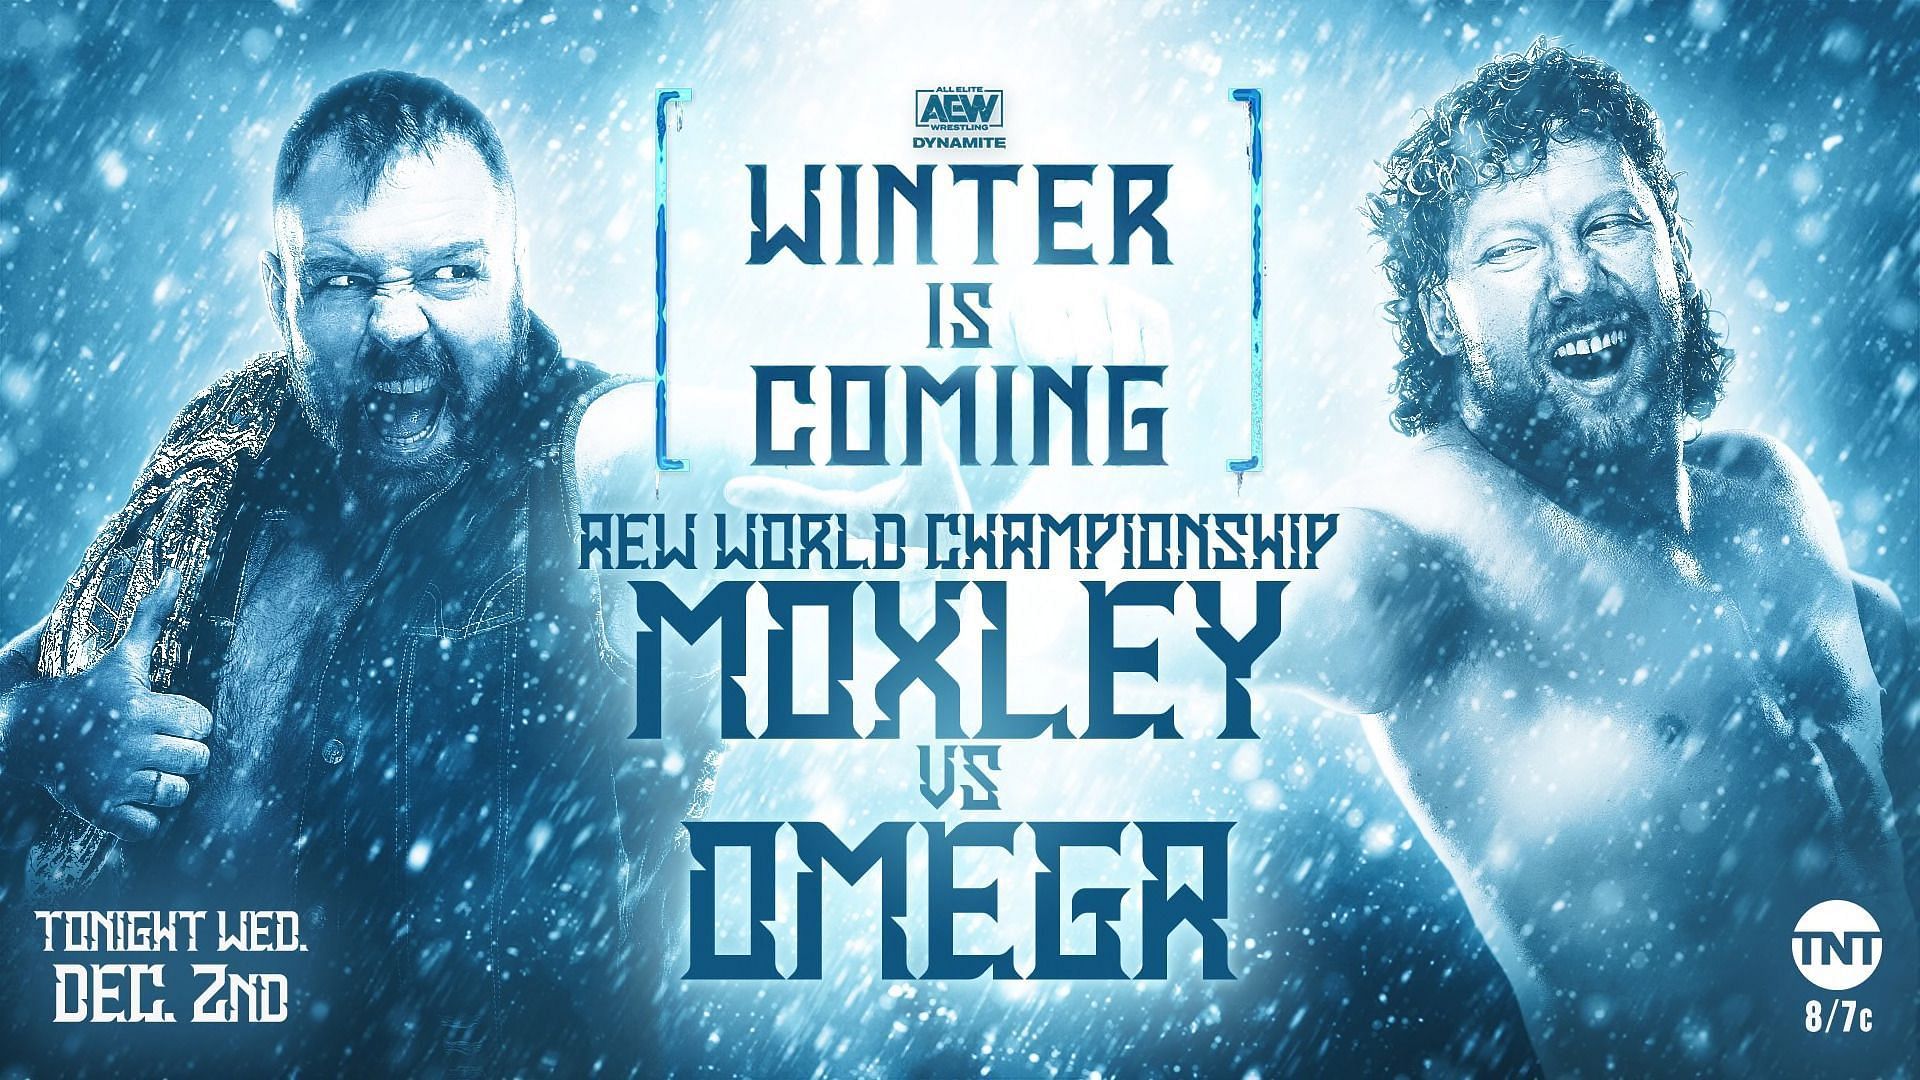 Kenny Omega vs Jon Moxley headlined AEW Winter Is Coming in 2020